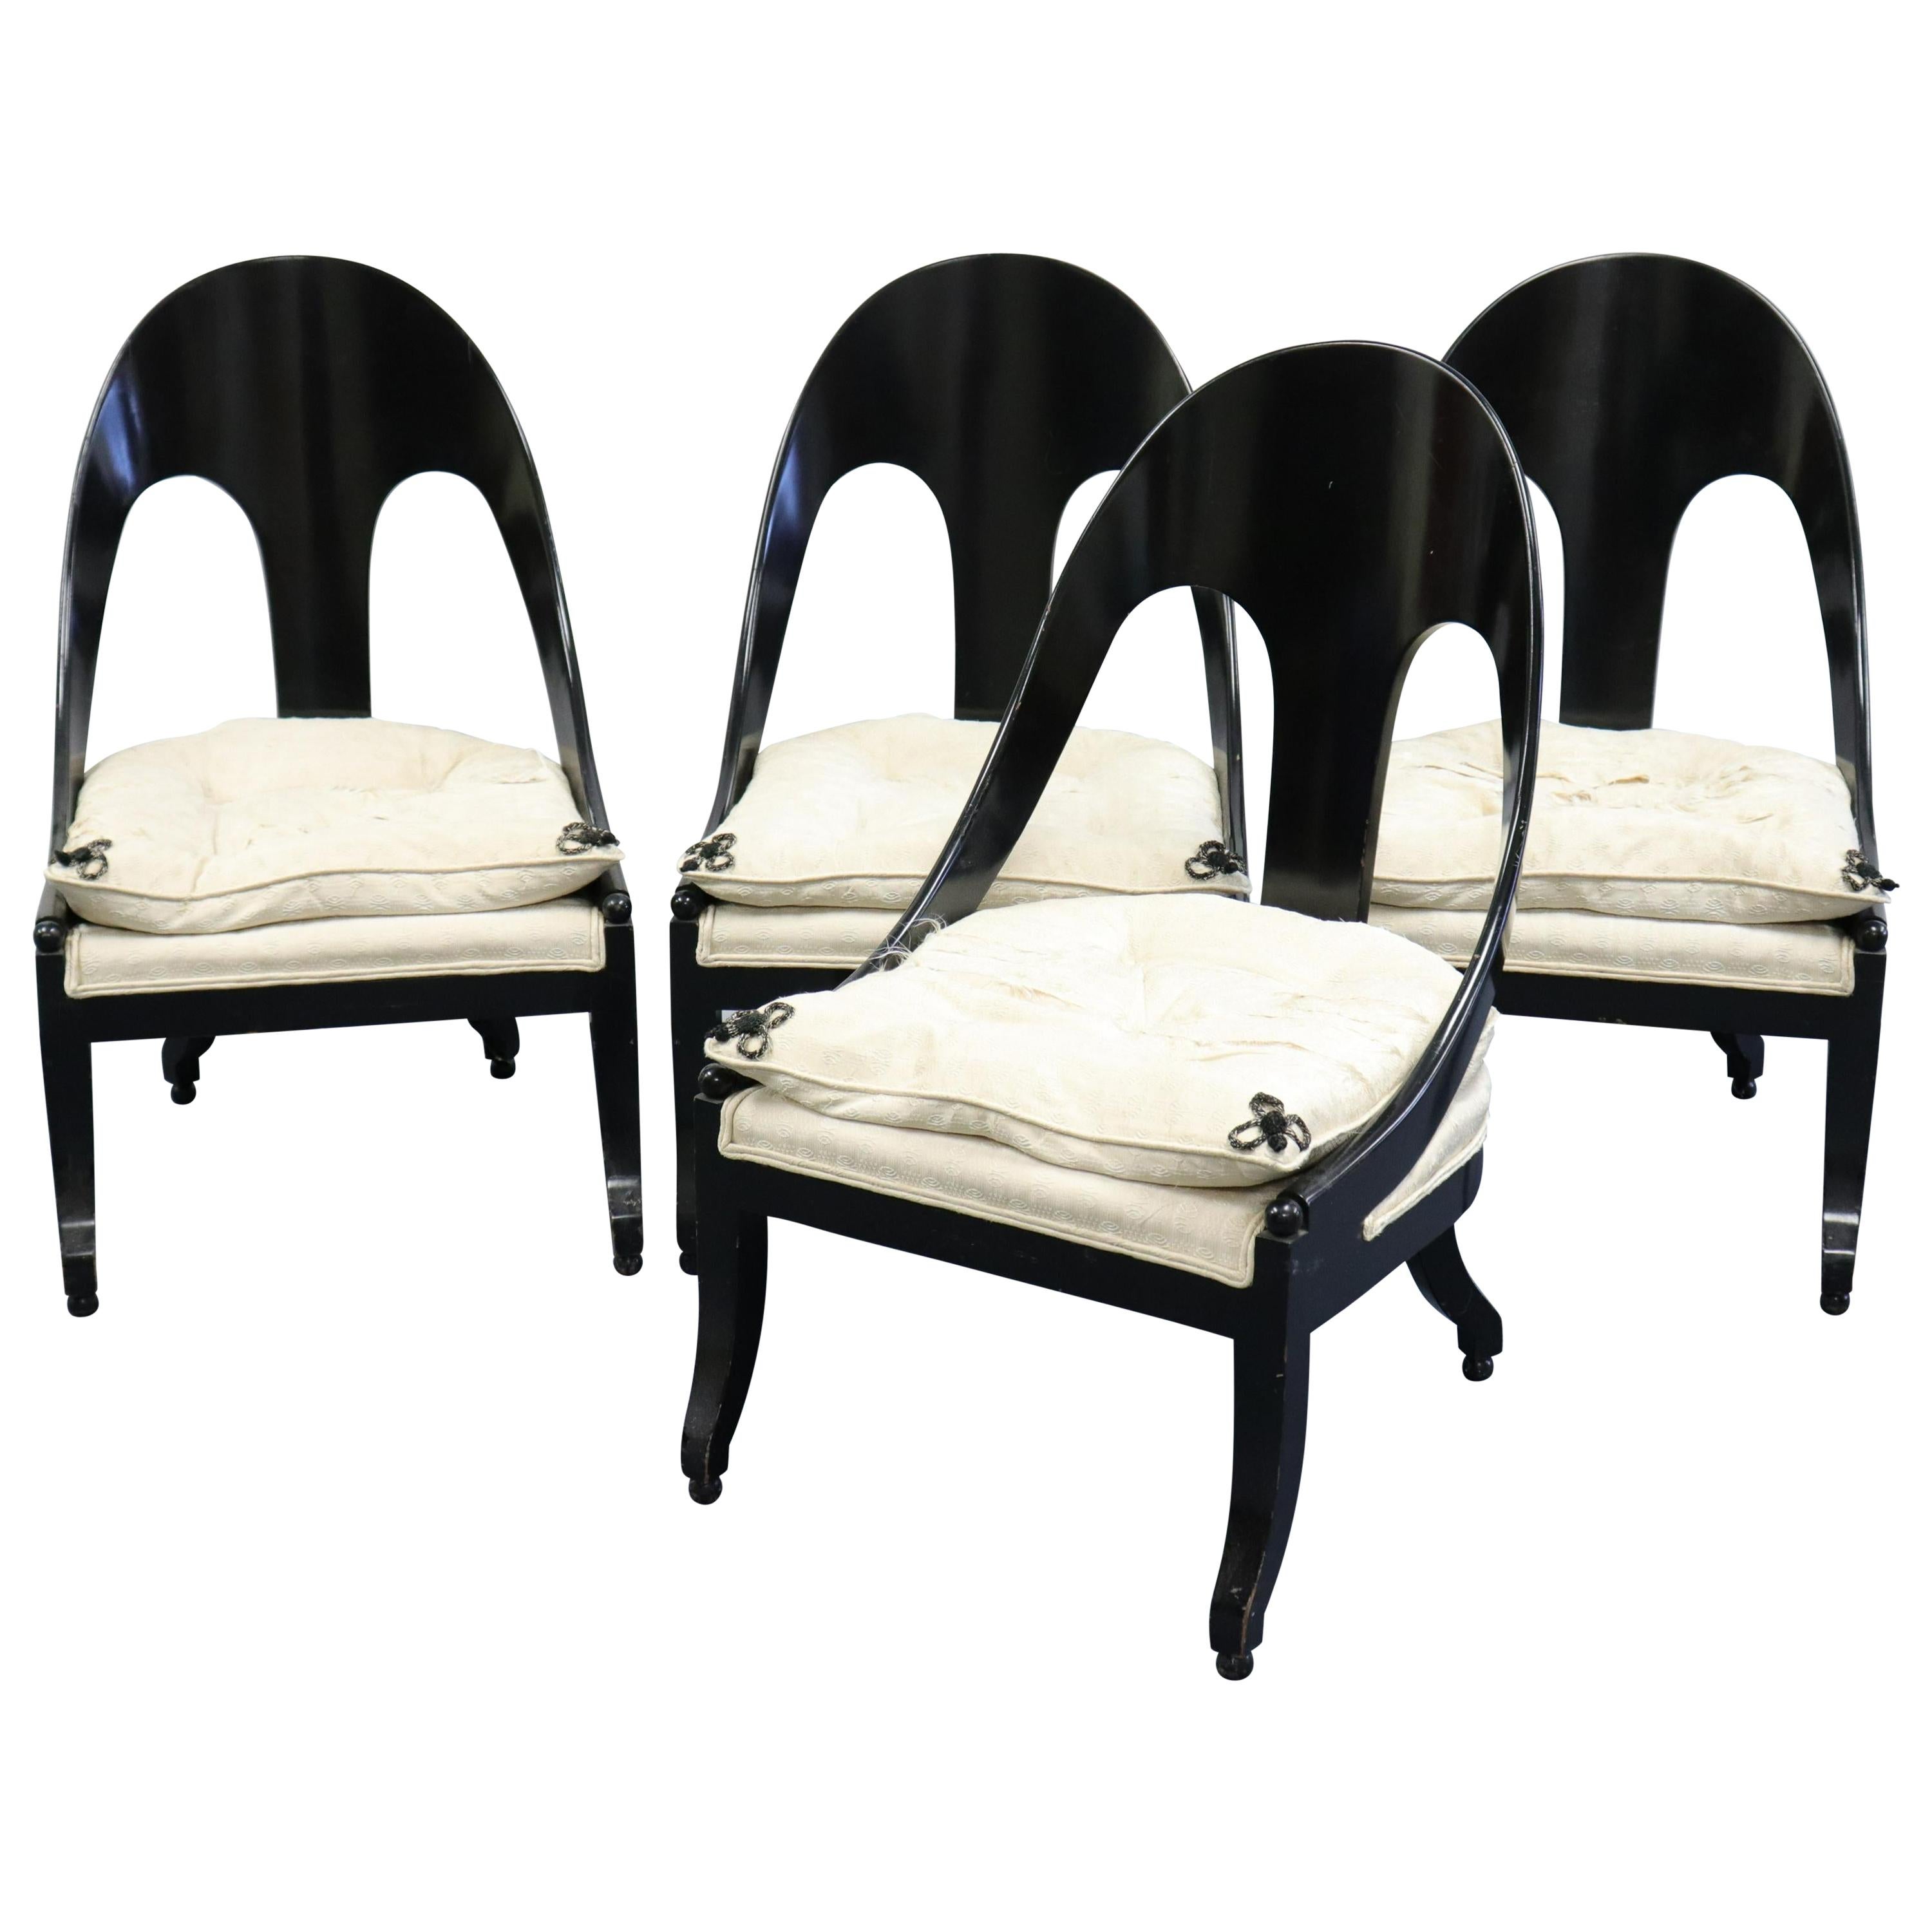 Four Neoclassical Mid-Century Modern Spoonback Chairs